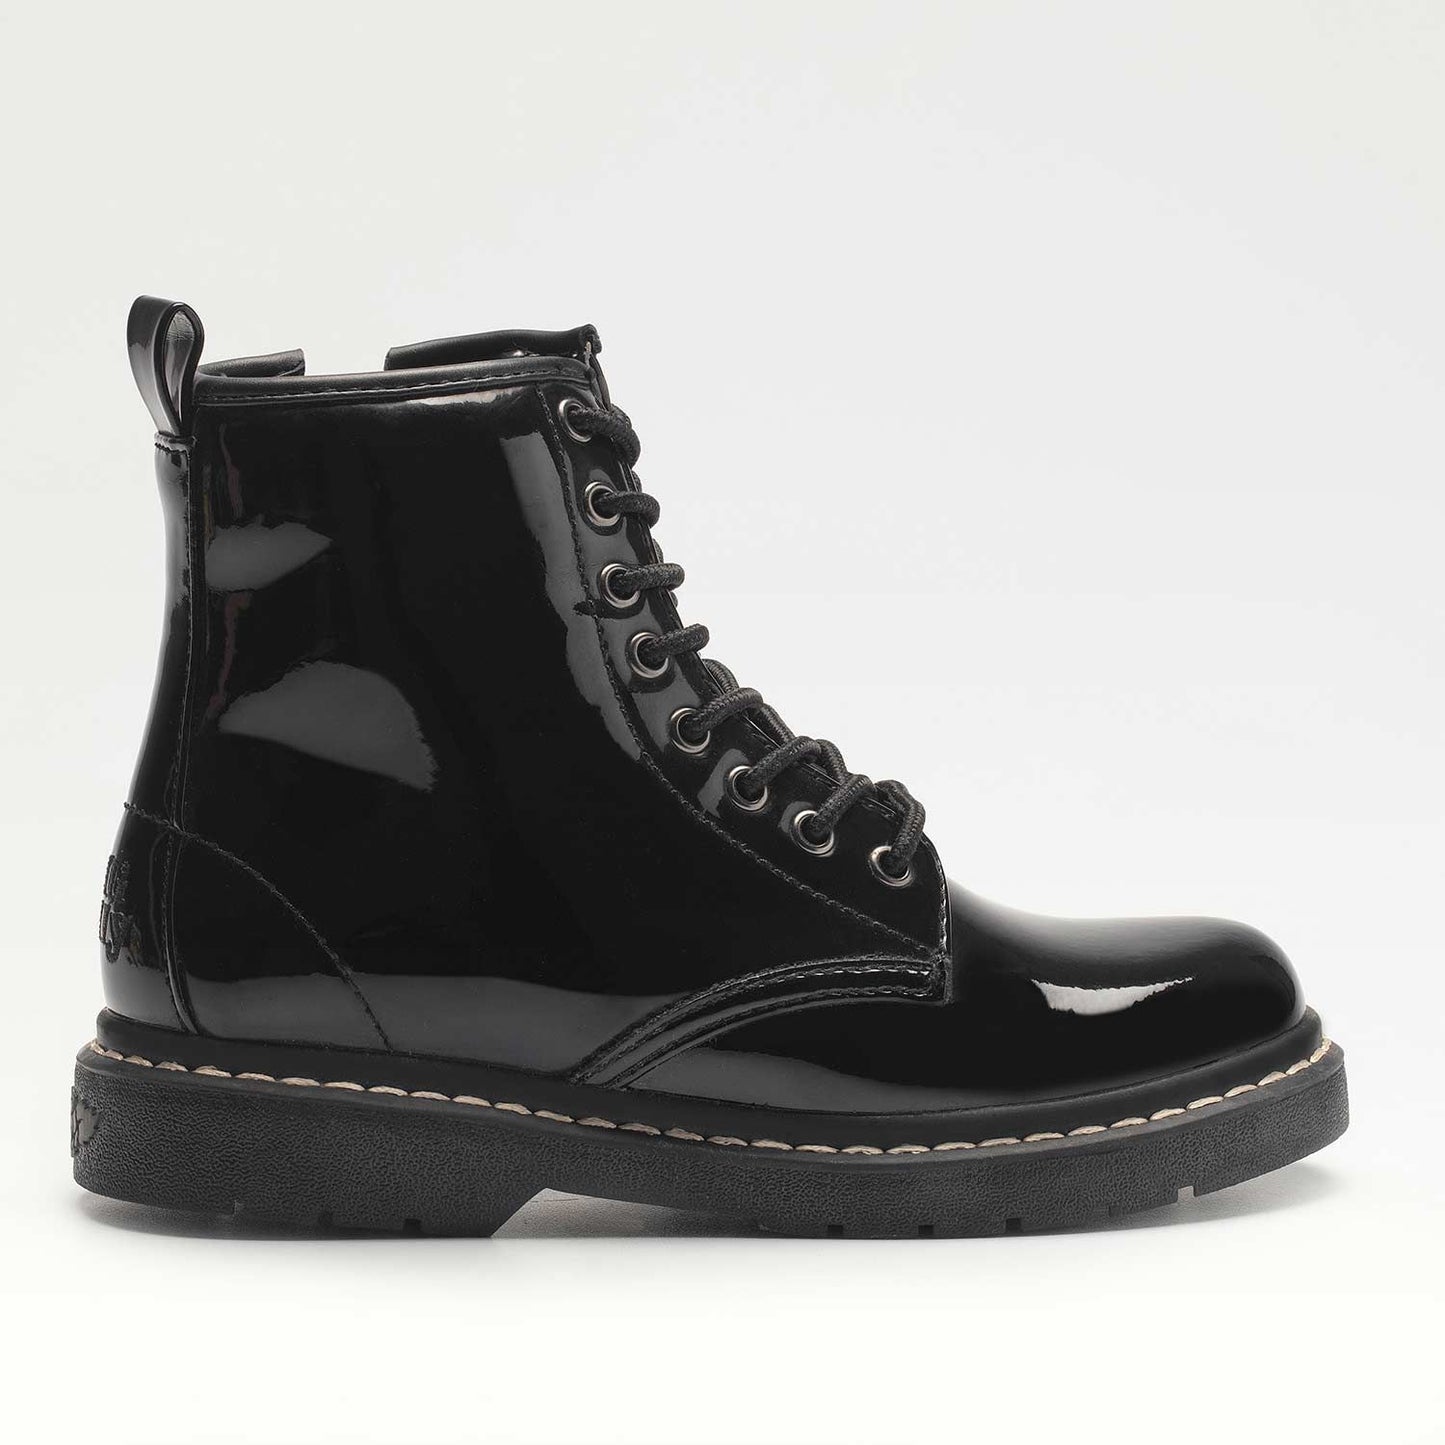 A girls school boot by Lelli Kelly, style Sofia, in black patent with lace and zip fastening. Right side view.